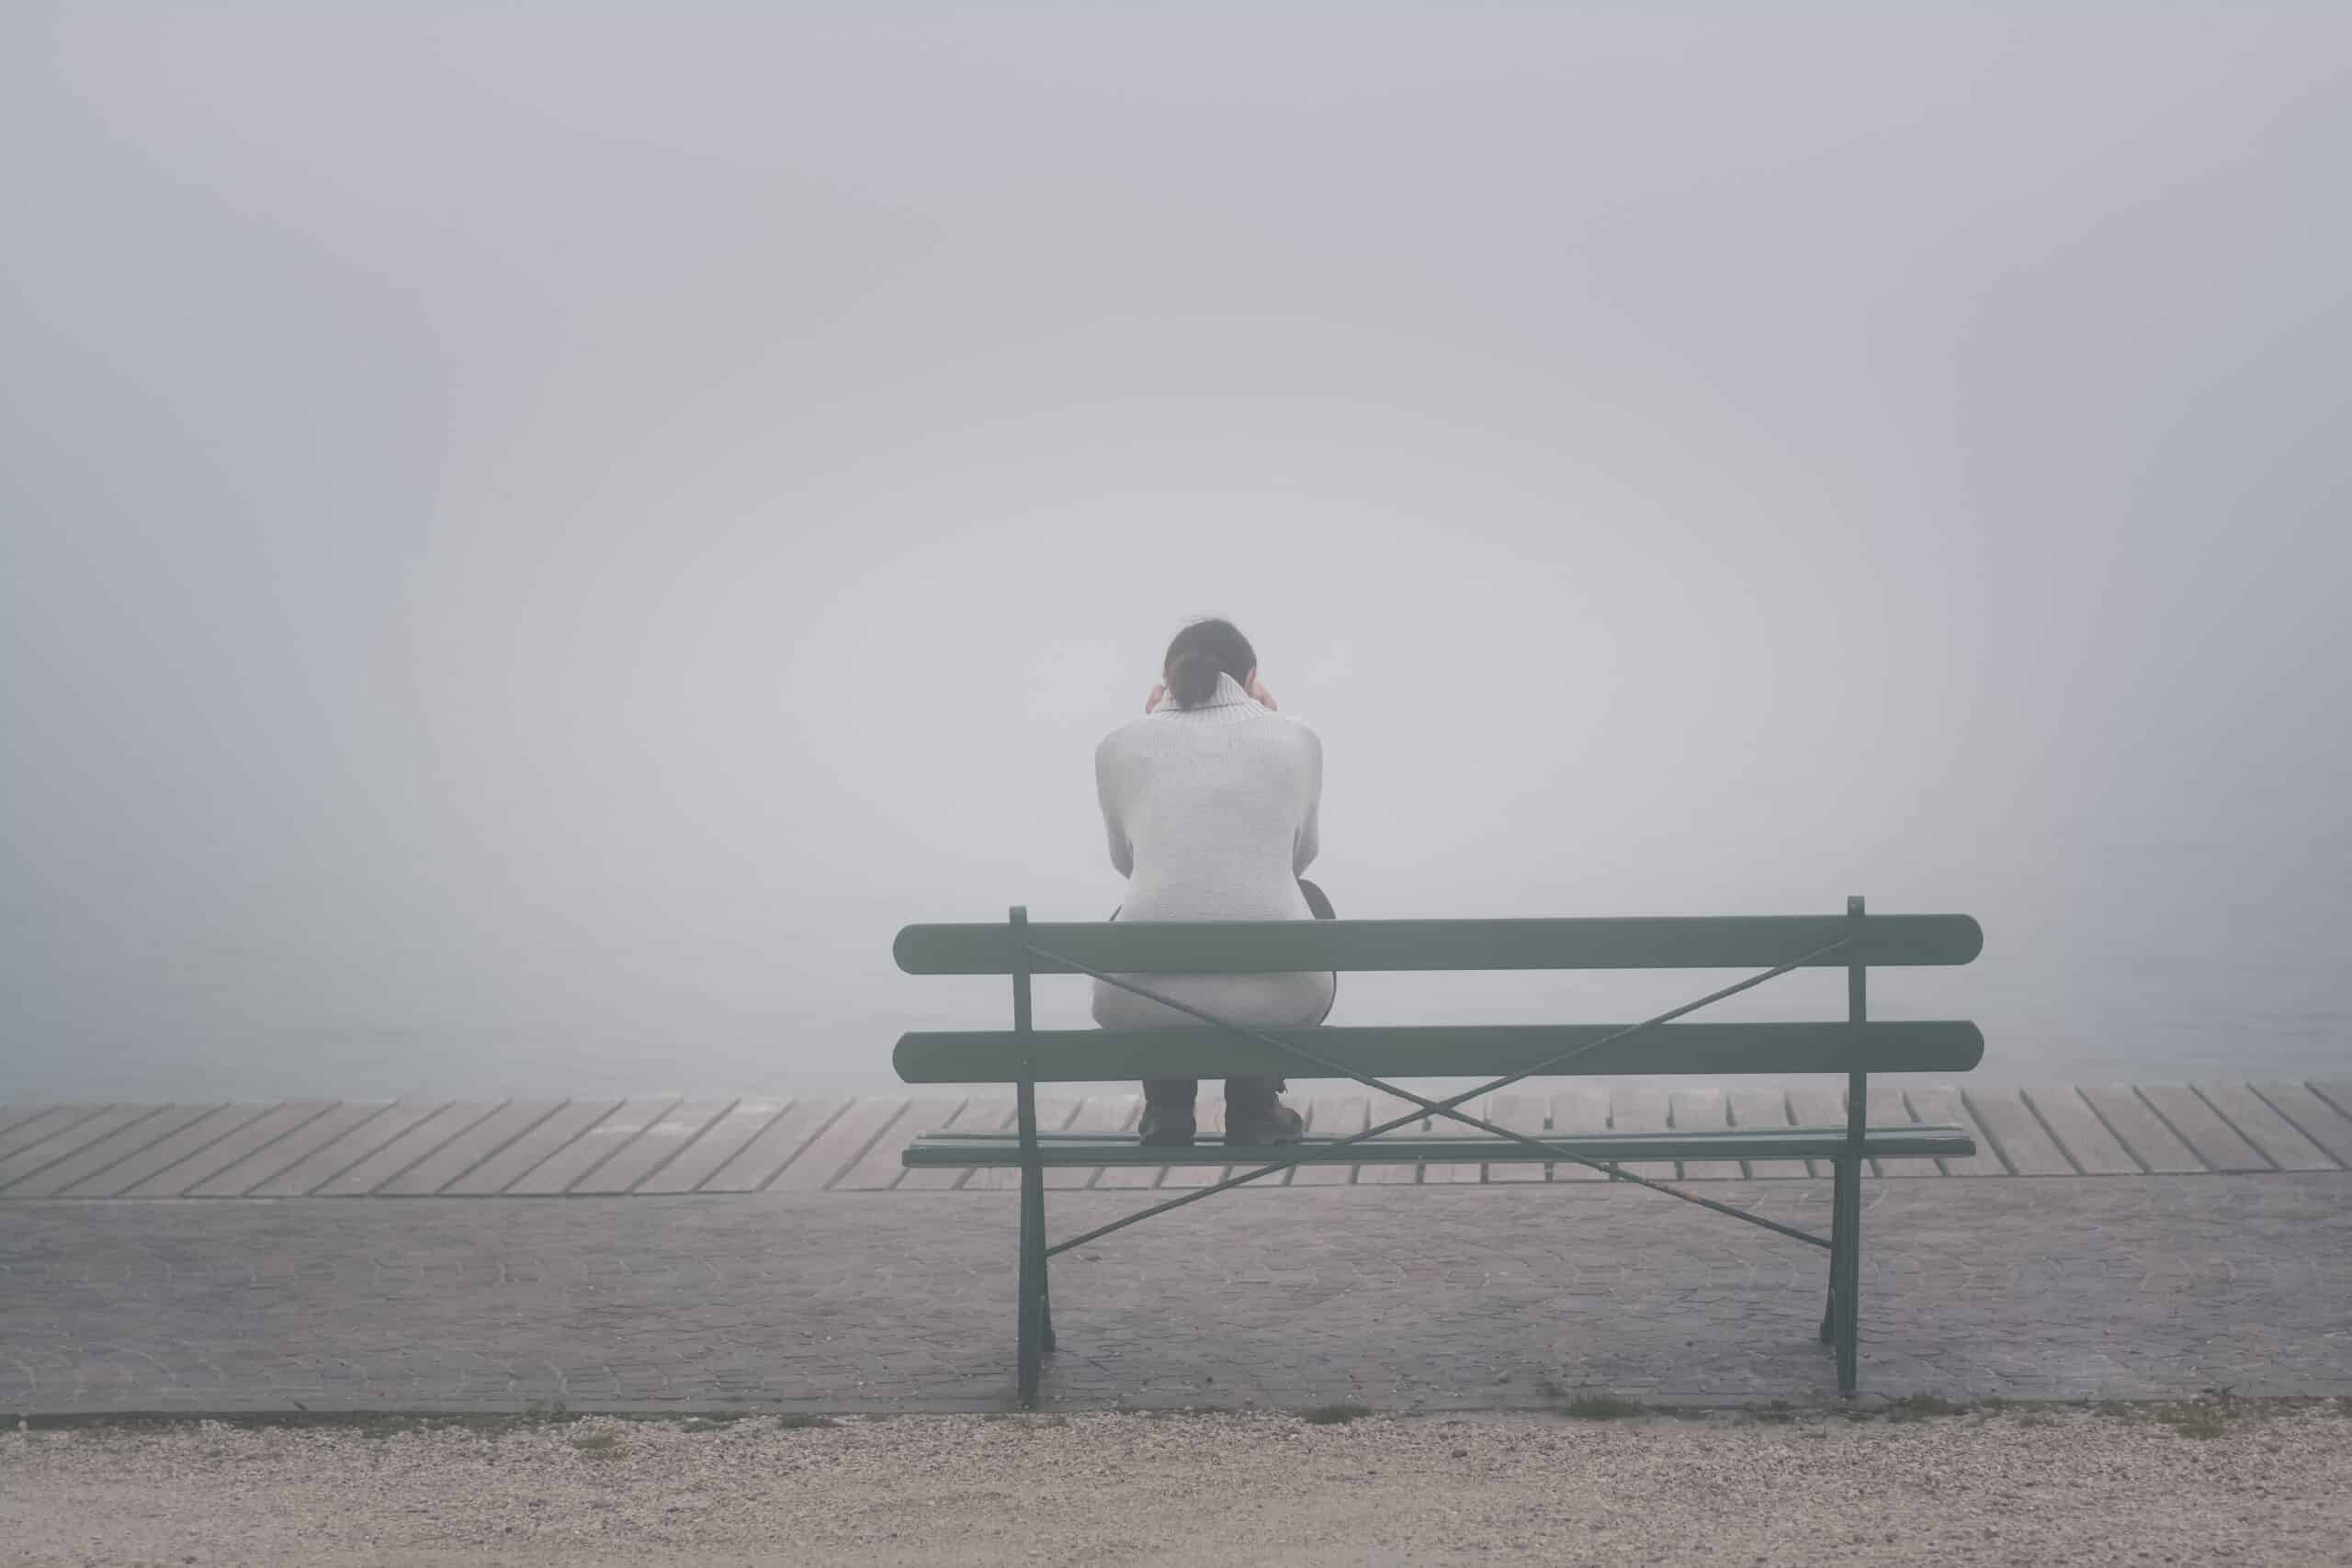 Employee who is on a bench on a foggy day, experiencing burnout and quiet quitting